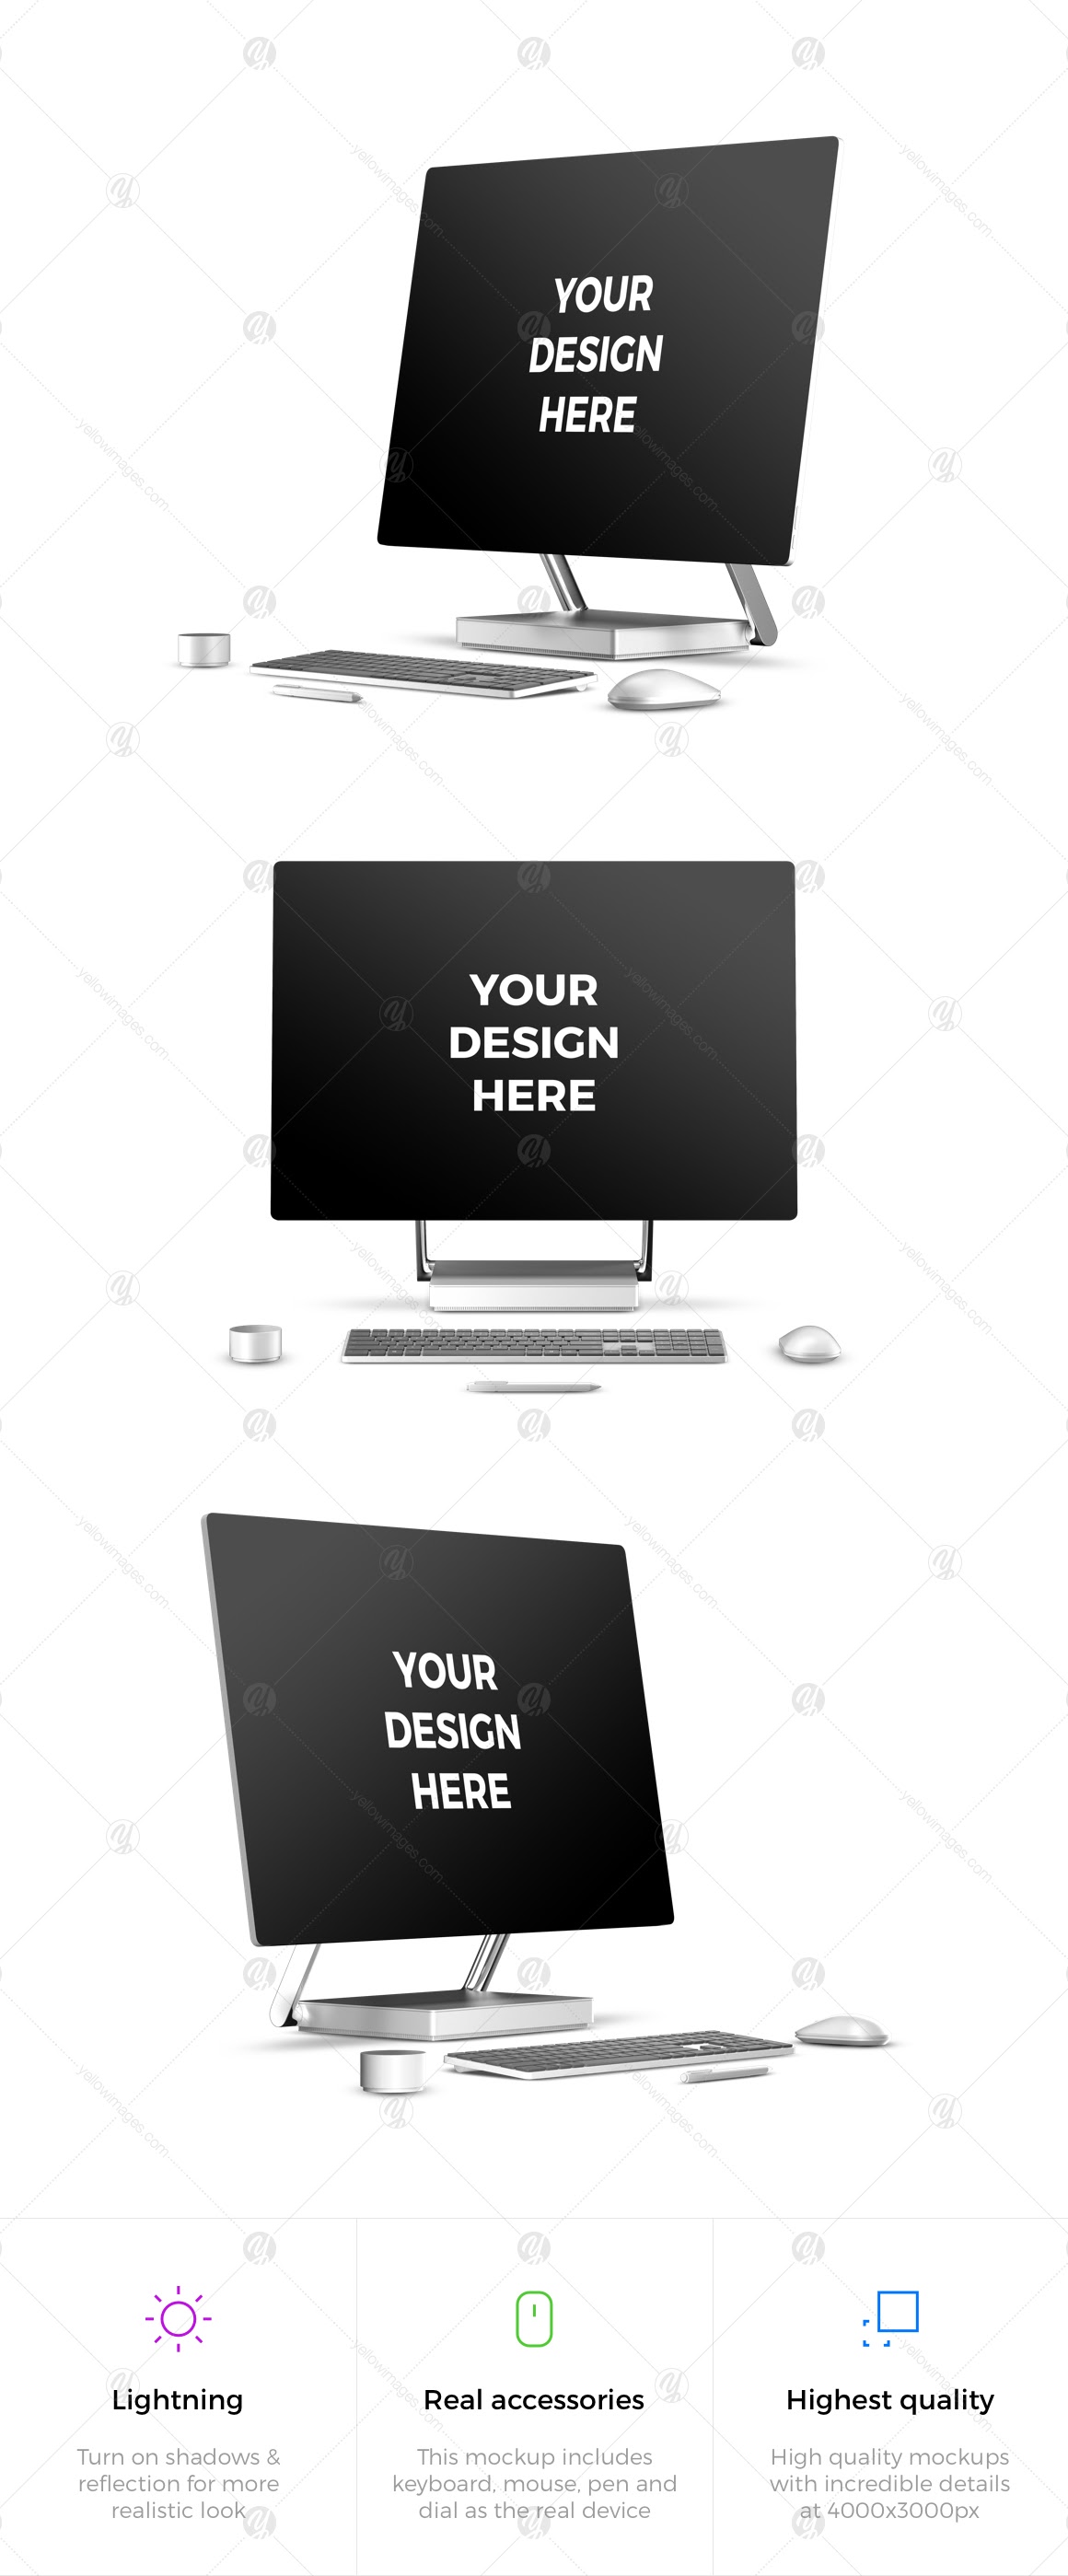 Download All Devices Mockup Psd Free White Background : Responsive Device Mockup Psd Download Free And ...